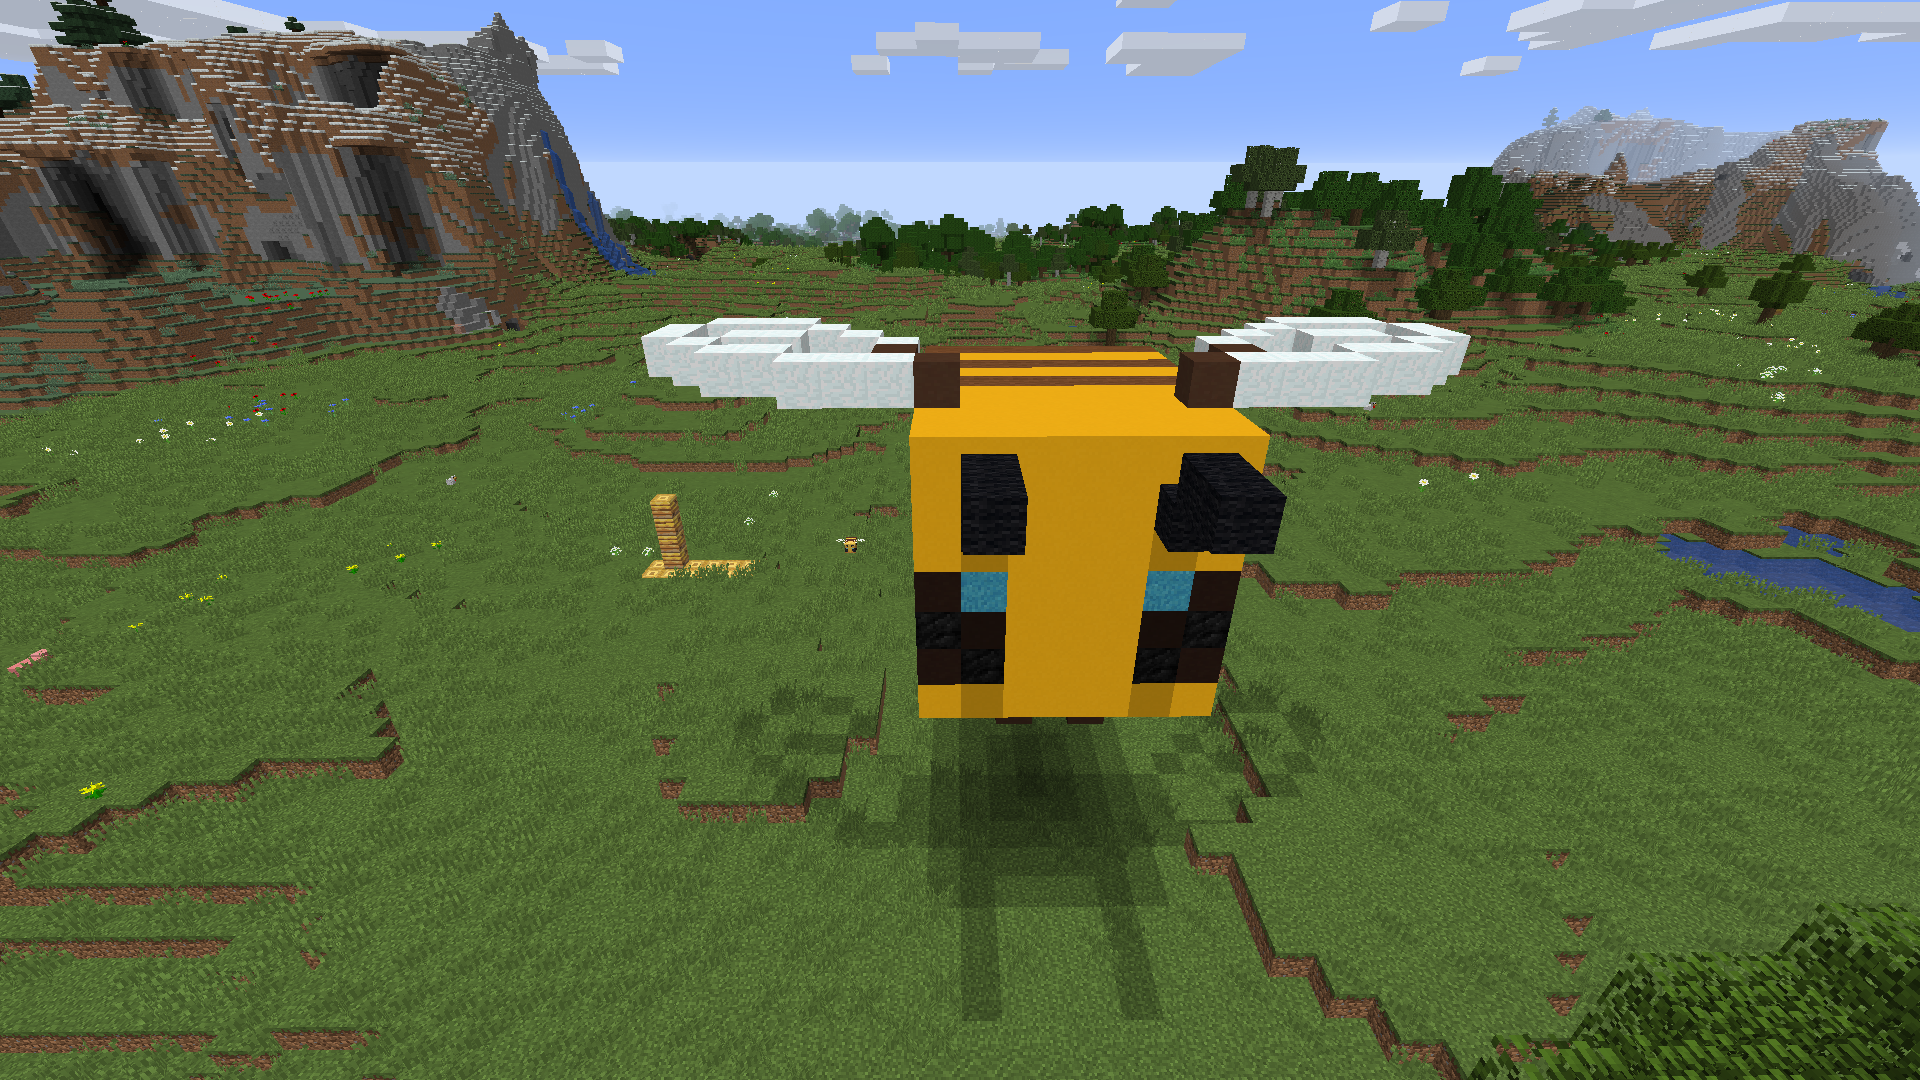 I built this statue of the bee!